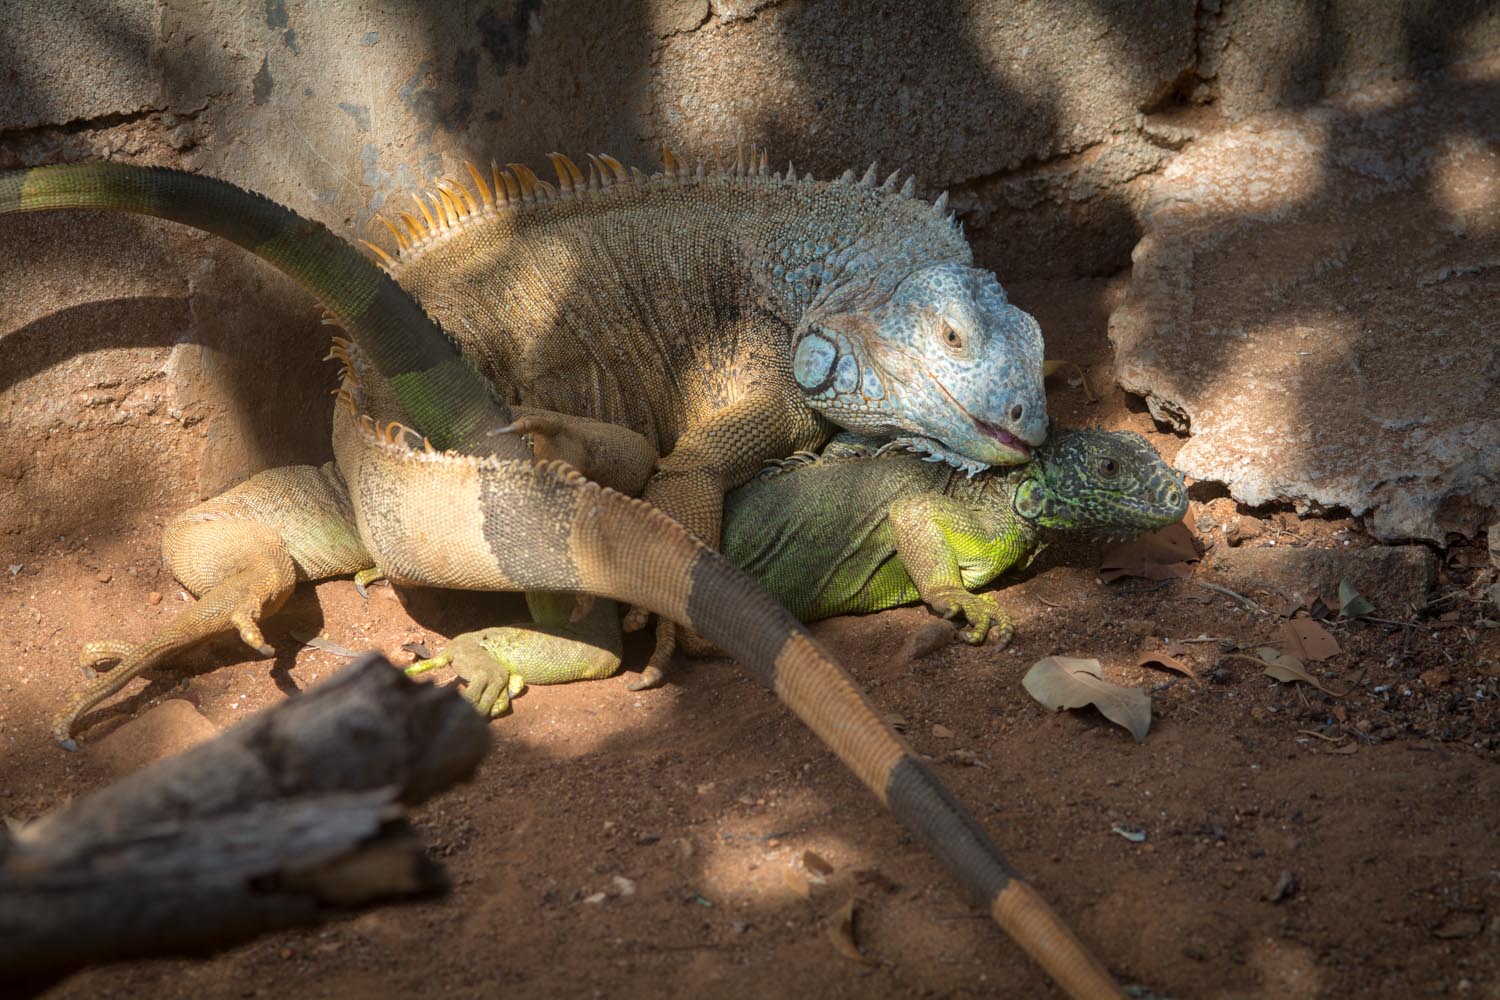 Iguanas mate in the dry season, and the females only lay eggs once a year. Photo: Ernesto J. Torres, Casa 12